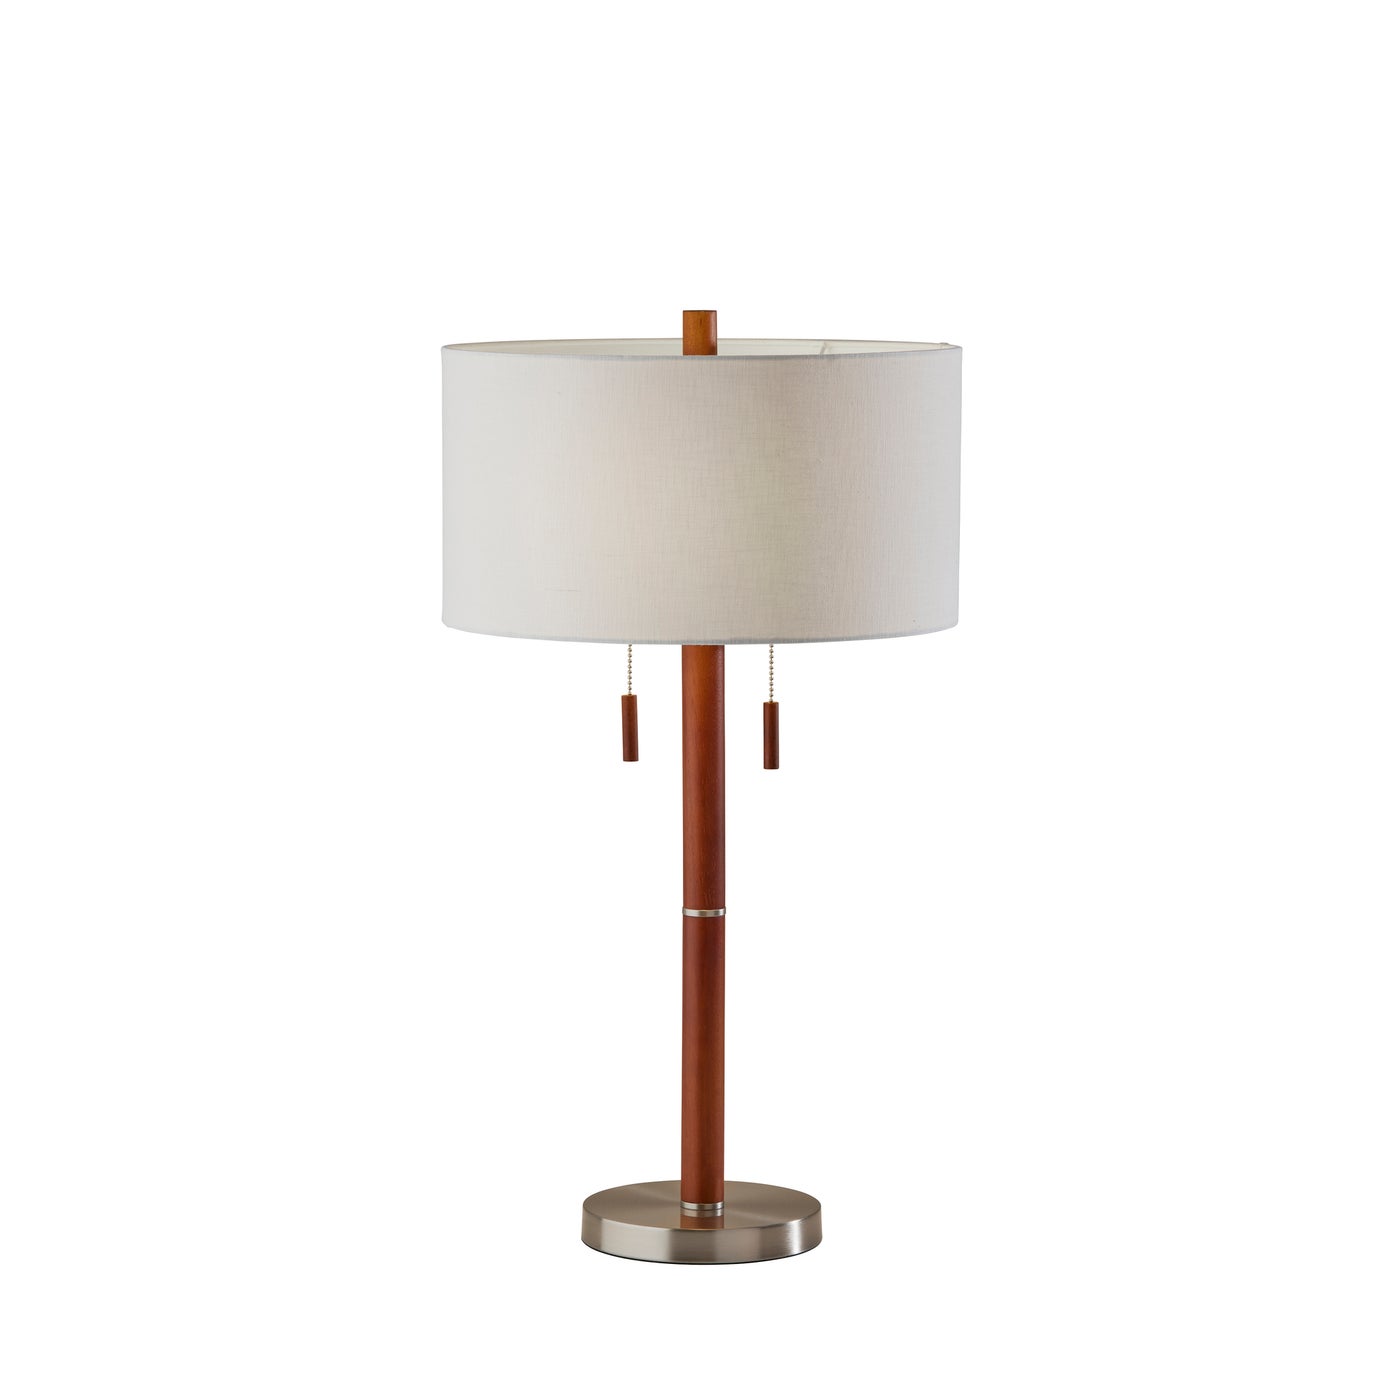 Adesso Home - 3374-15 - Two Light Table Lamp - Madeline - Walnut Rubberwood & Brushed Steel